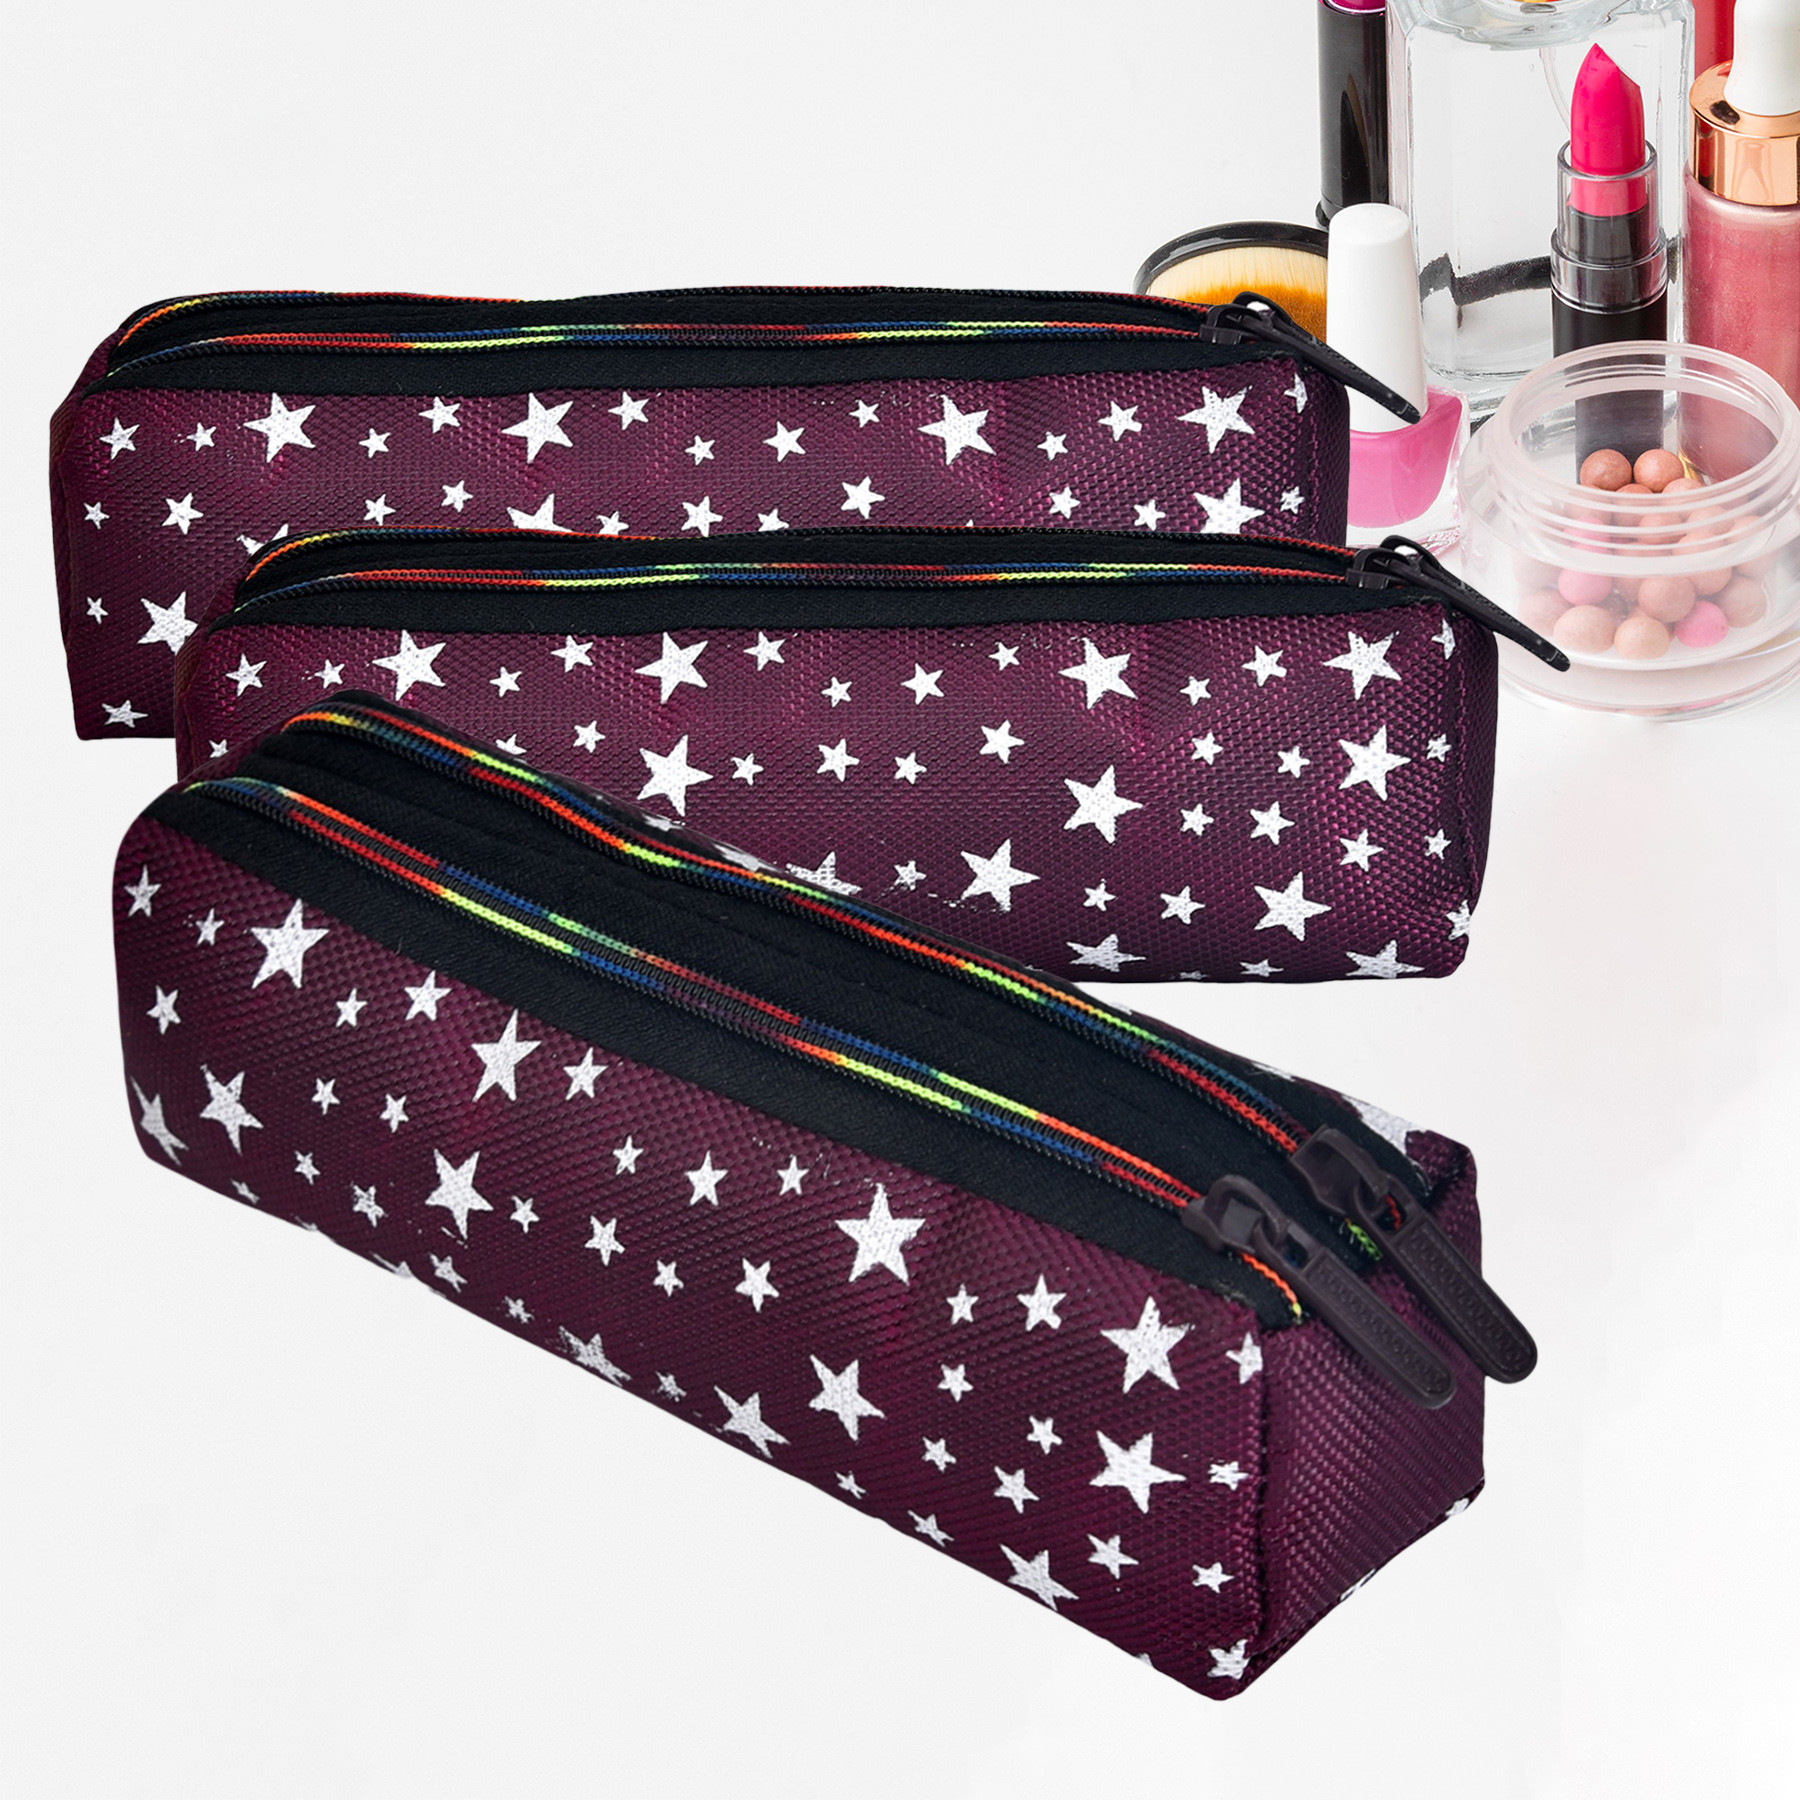 Kuber Industries Makeup Pouch | Rexine Cosmetic Pouch | Jewellery Utility Pouch | Toiletry Pouch for Girls | Travel Makeup Pouch for Girls | Storage Makeup Bag | Star Makeup Pouch |Maroon